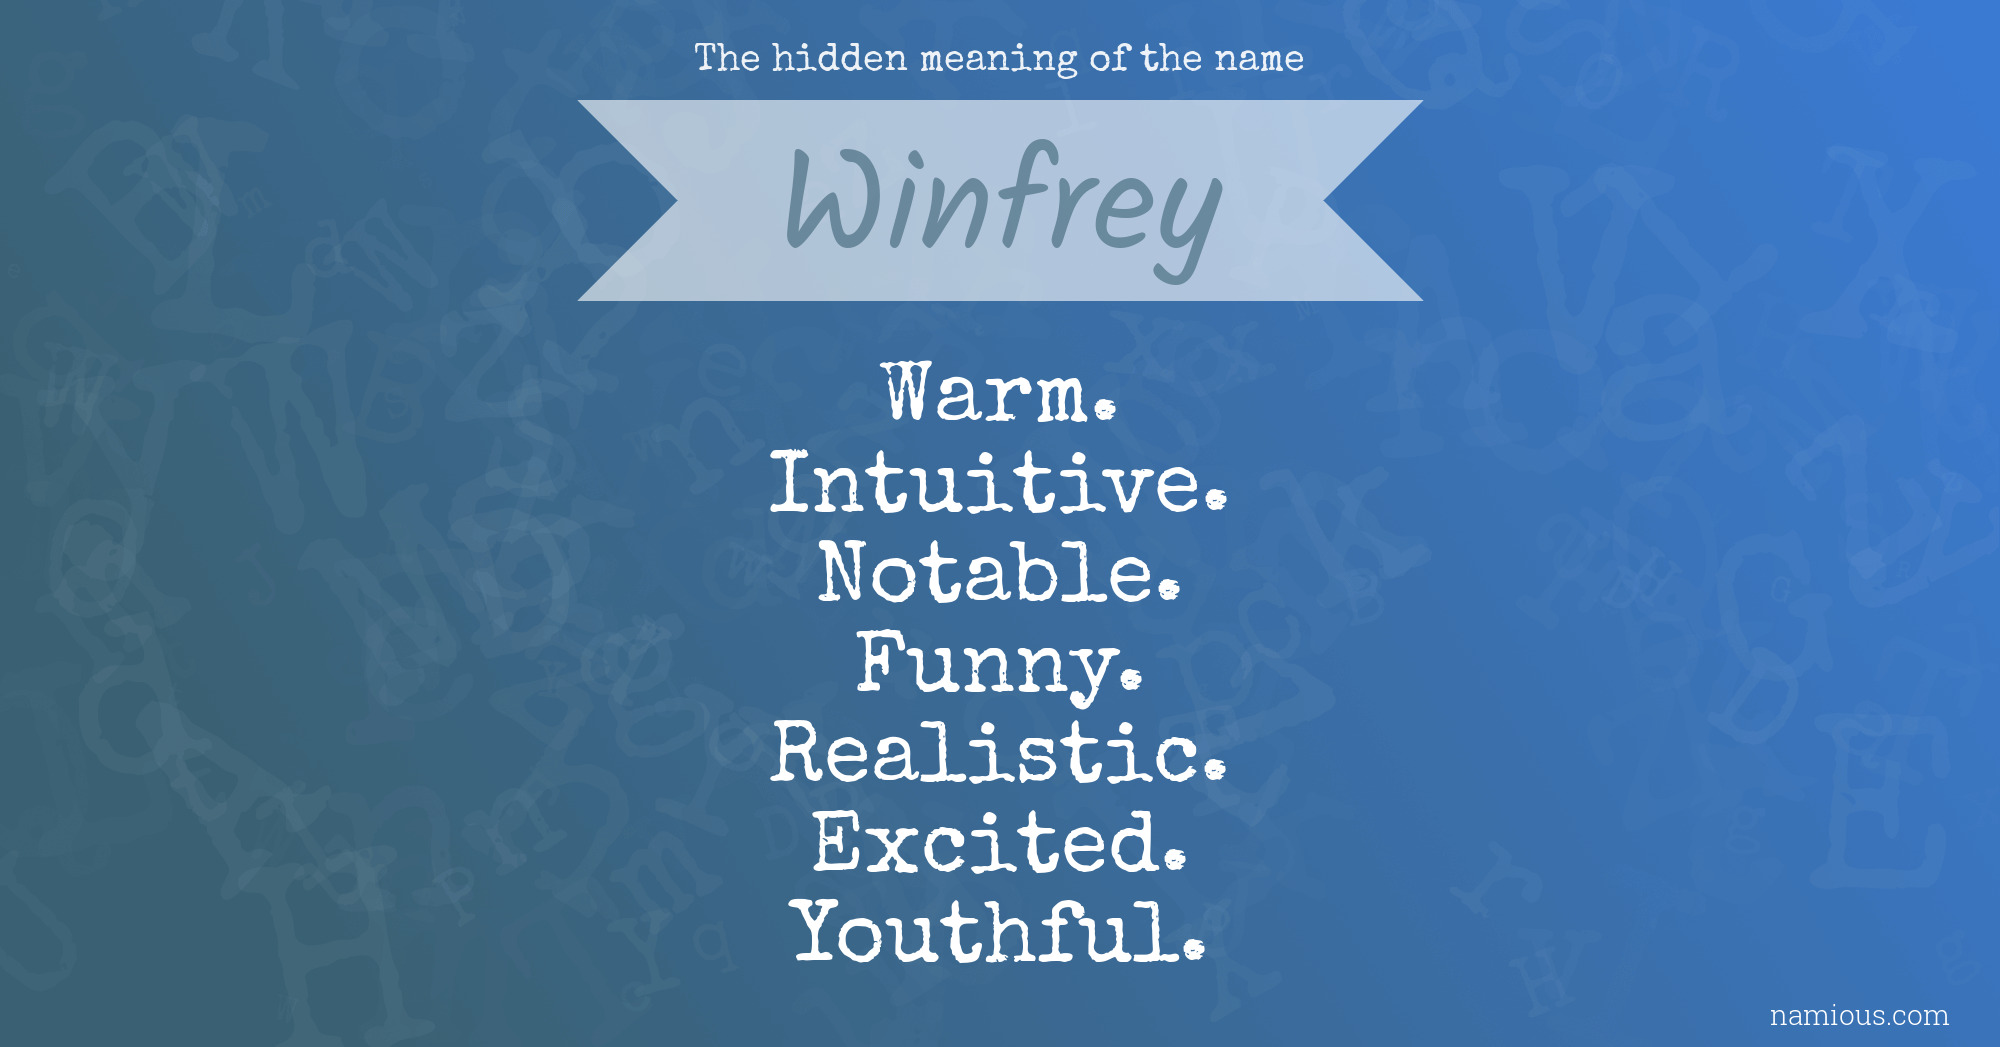 The hidden meaning of the name Winfrey